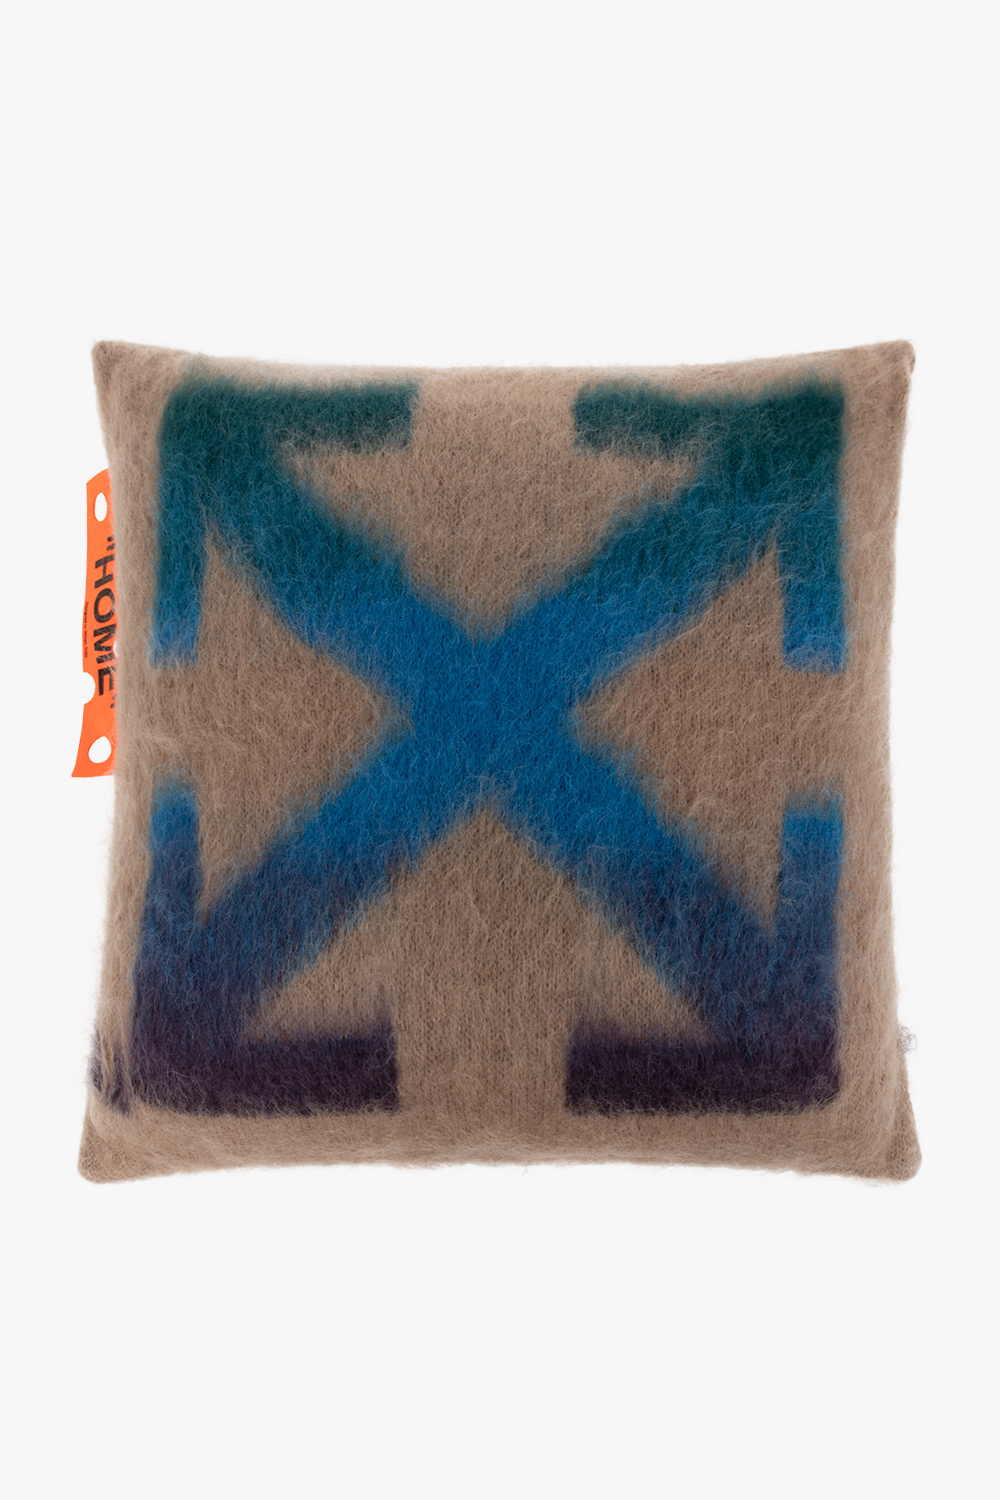 Off-White Cushion with Arrows motif